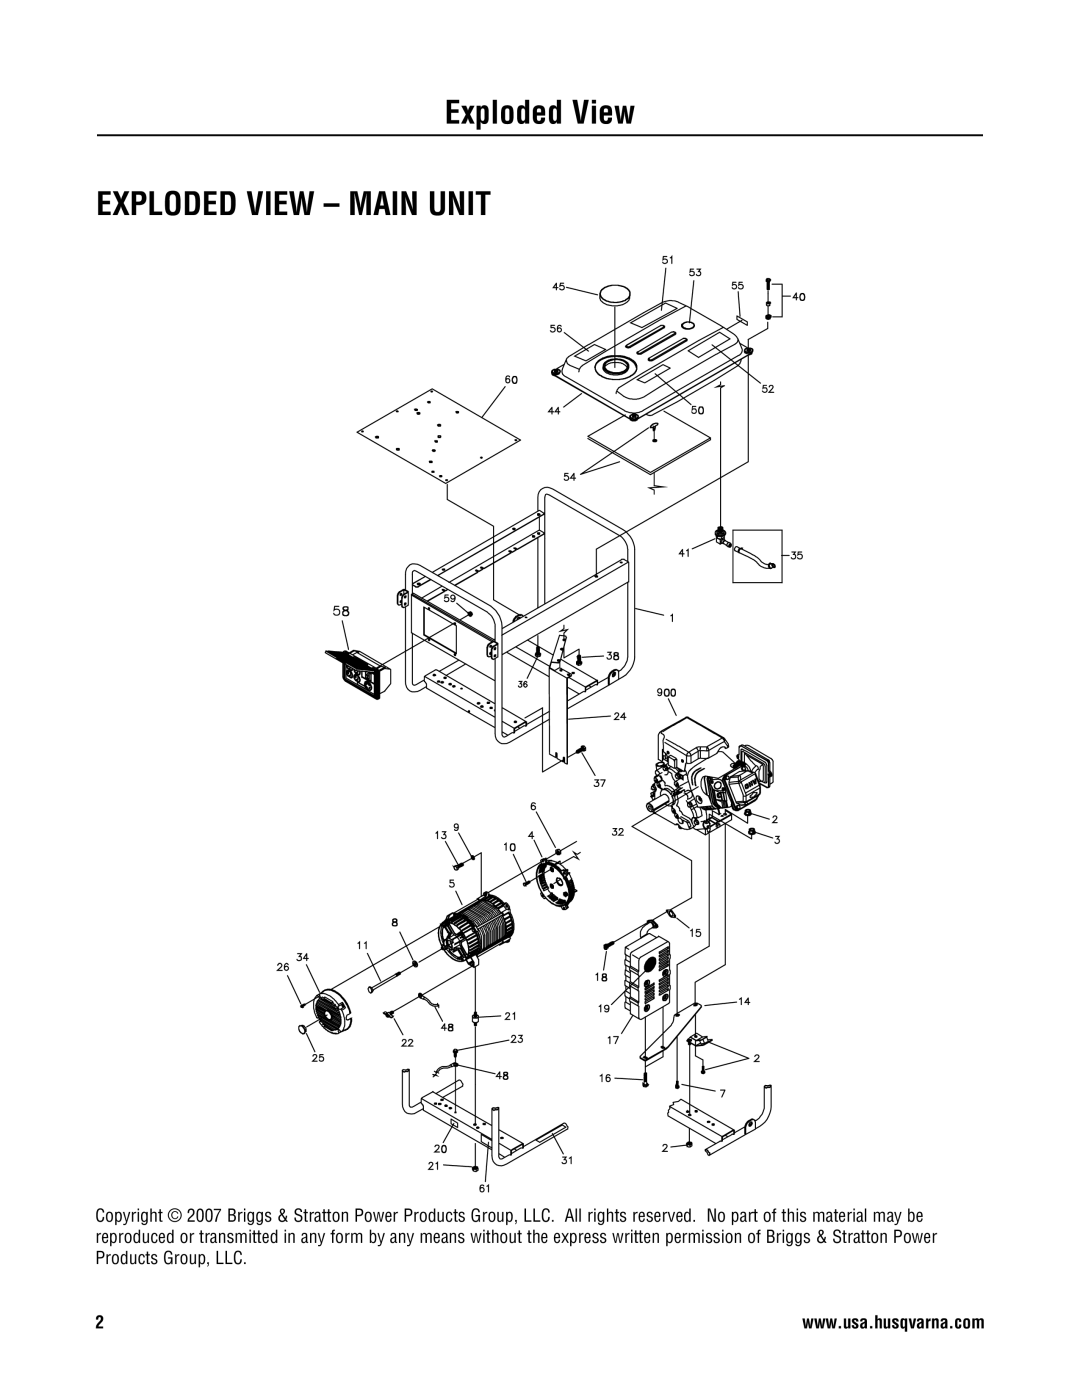 Husqvarna 1055 GN manual Exploded View EXPLODED VIEW - MAIN UNIT 